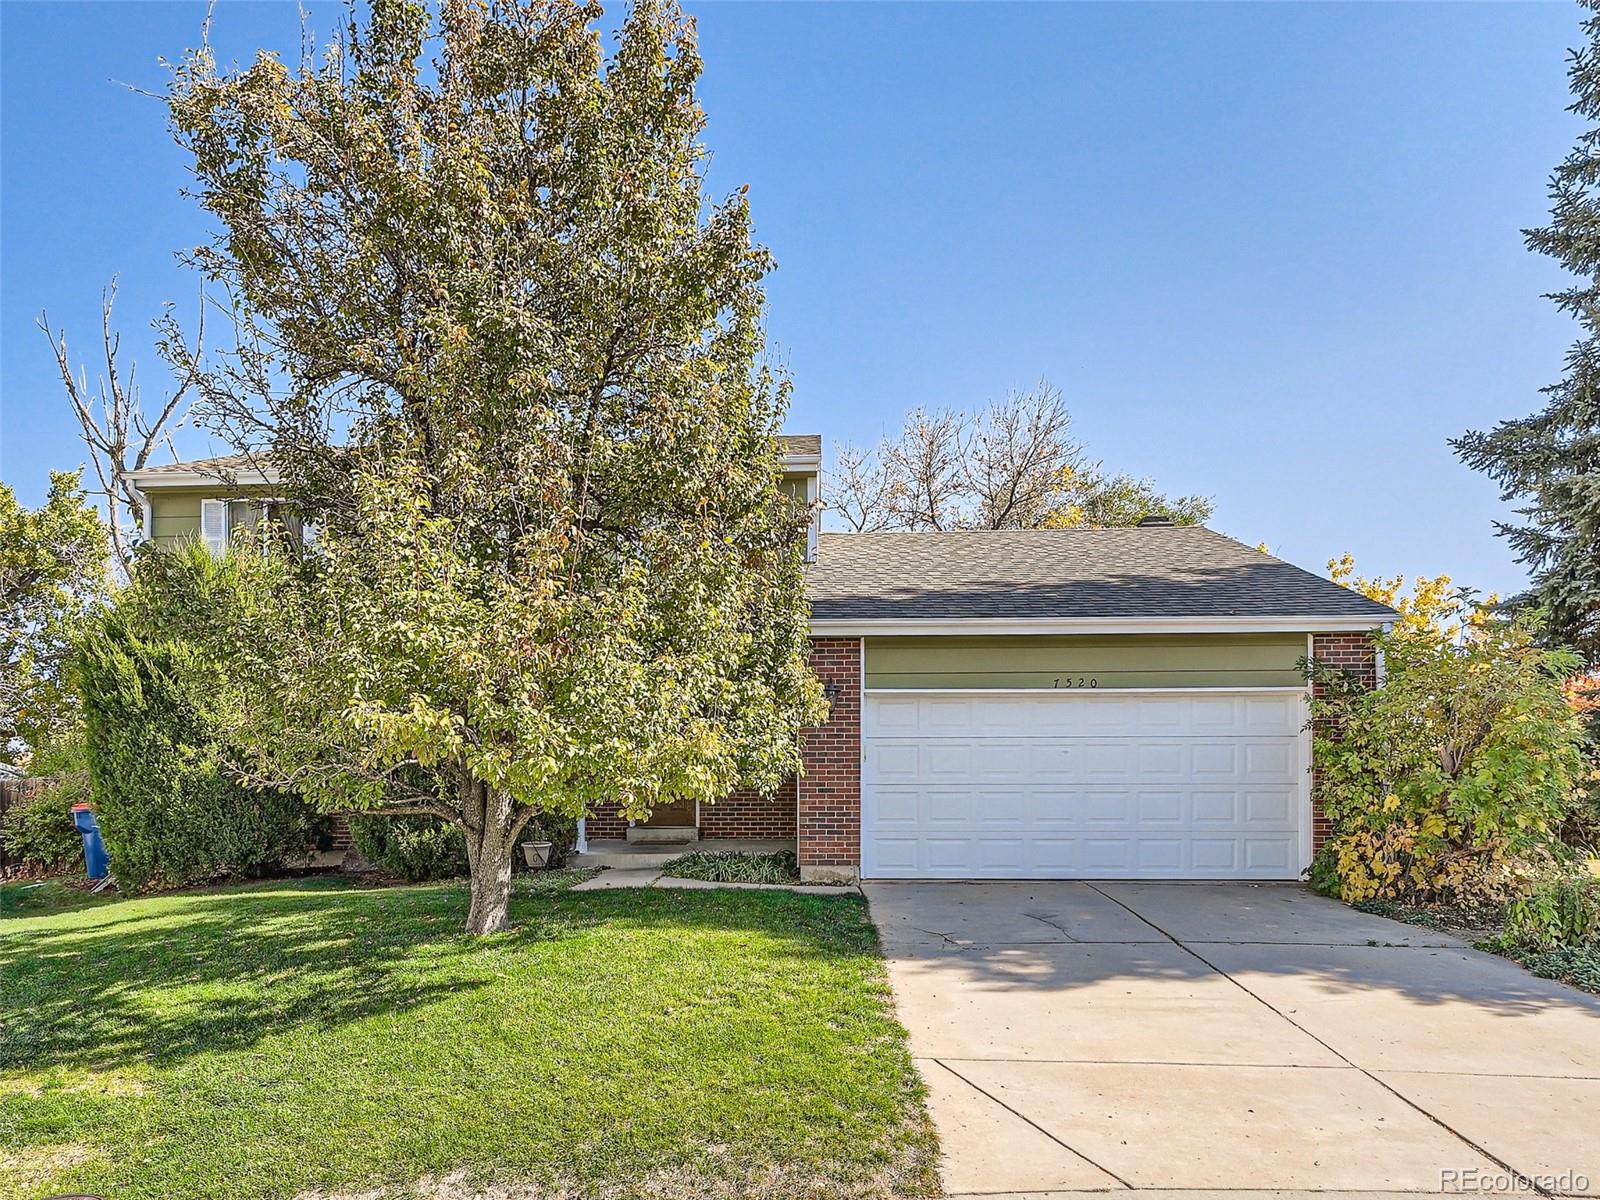 7520  ames street, Arvada sold home. Closed on 2024-01-16 for $542,000.